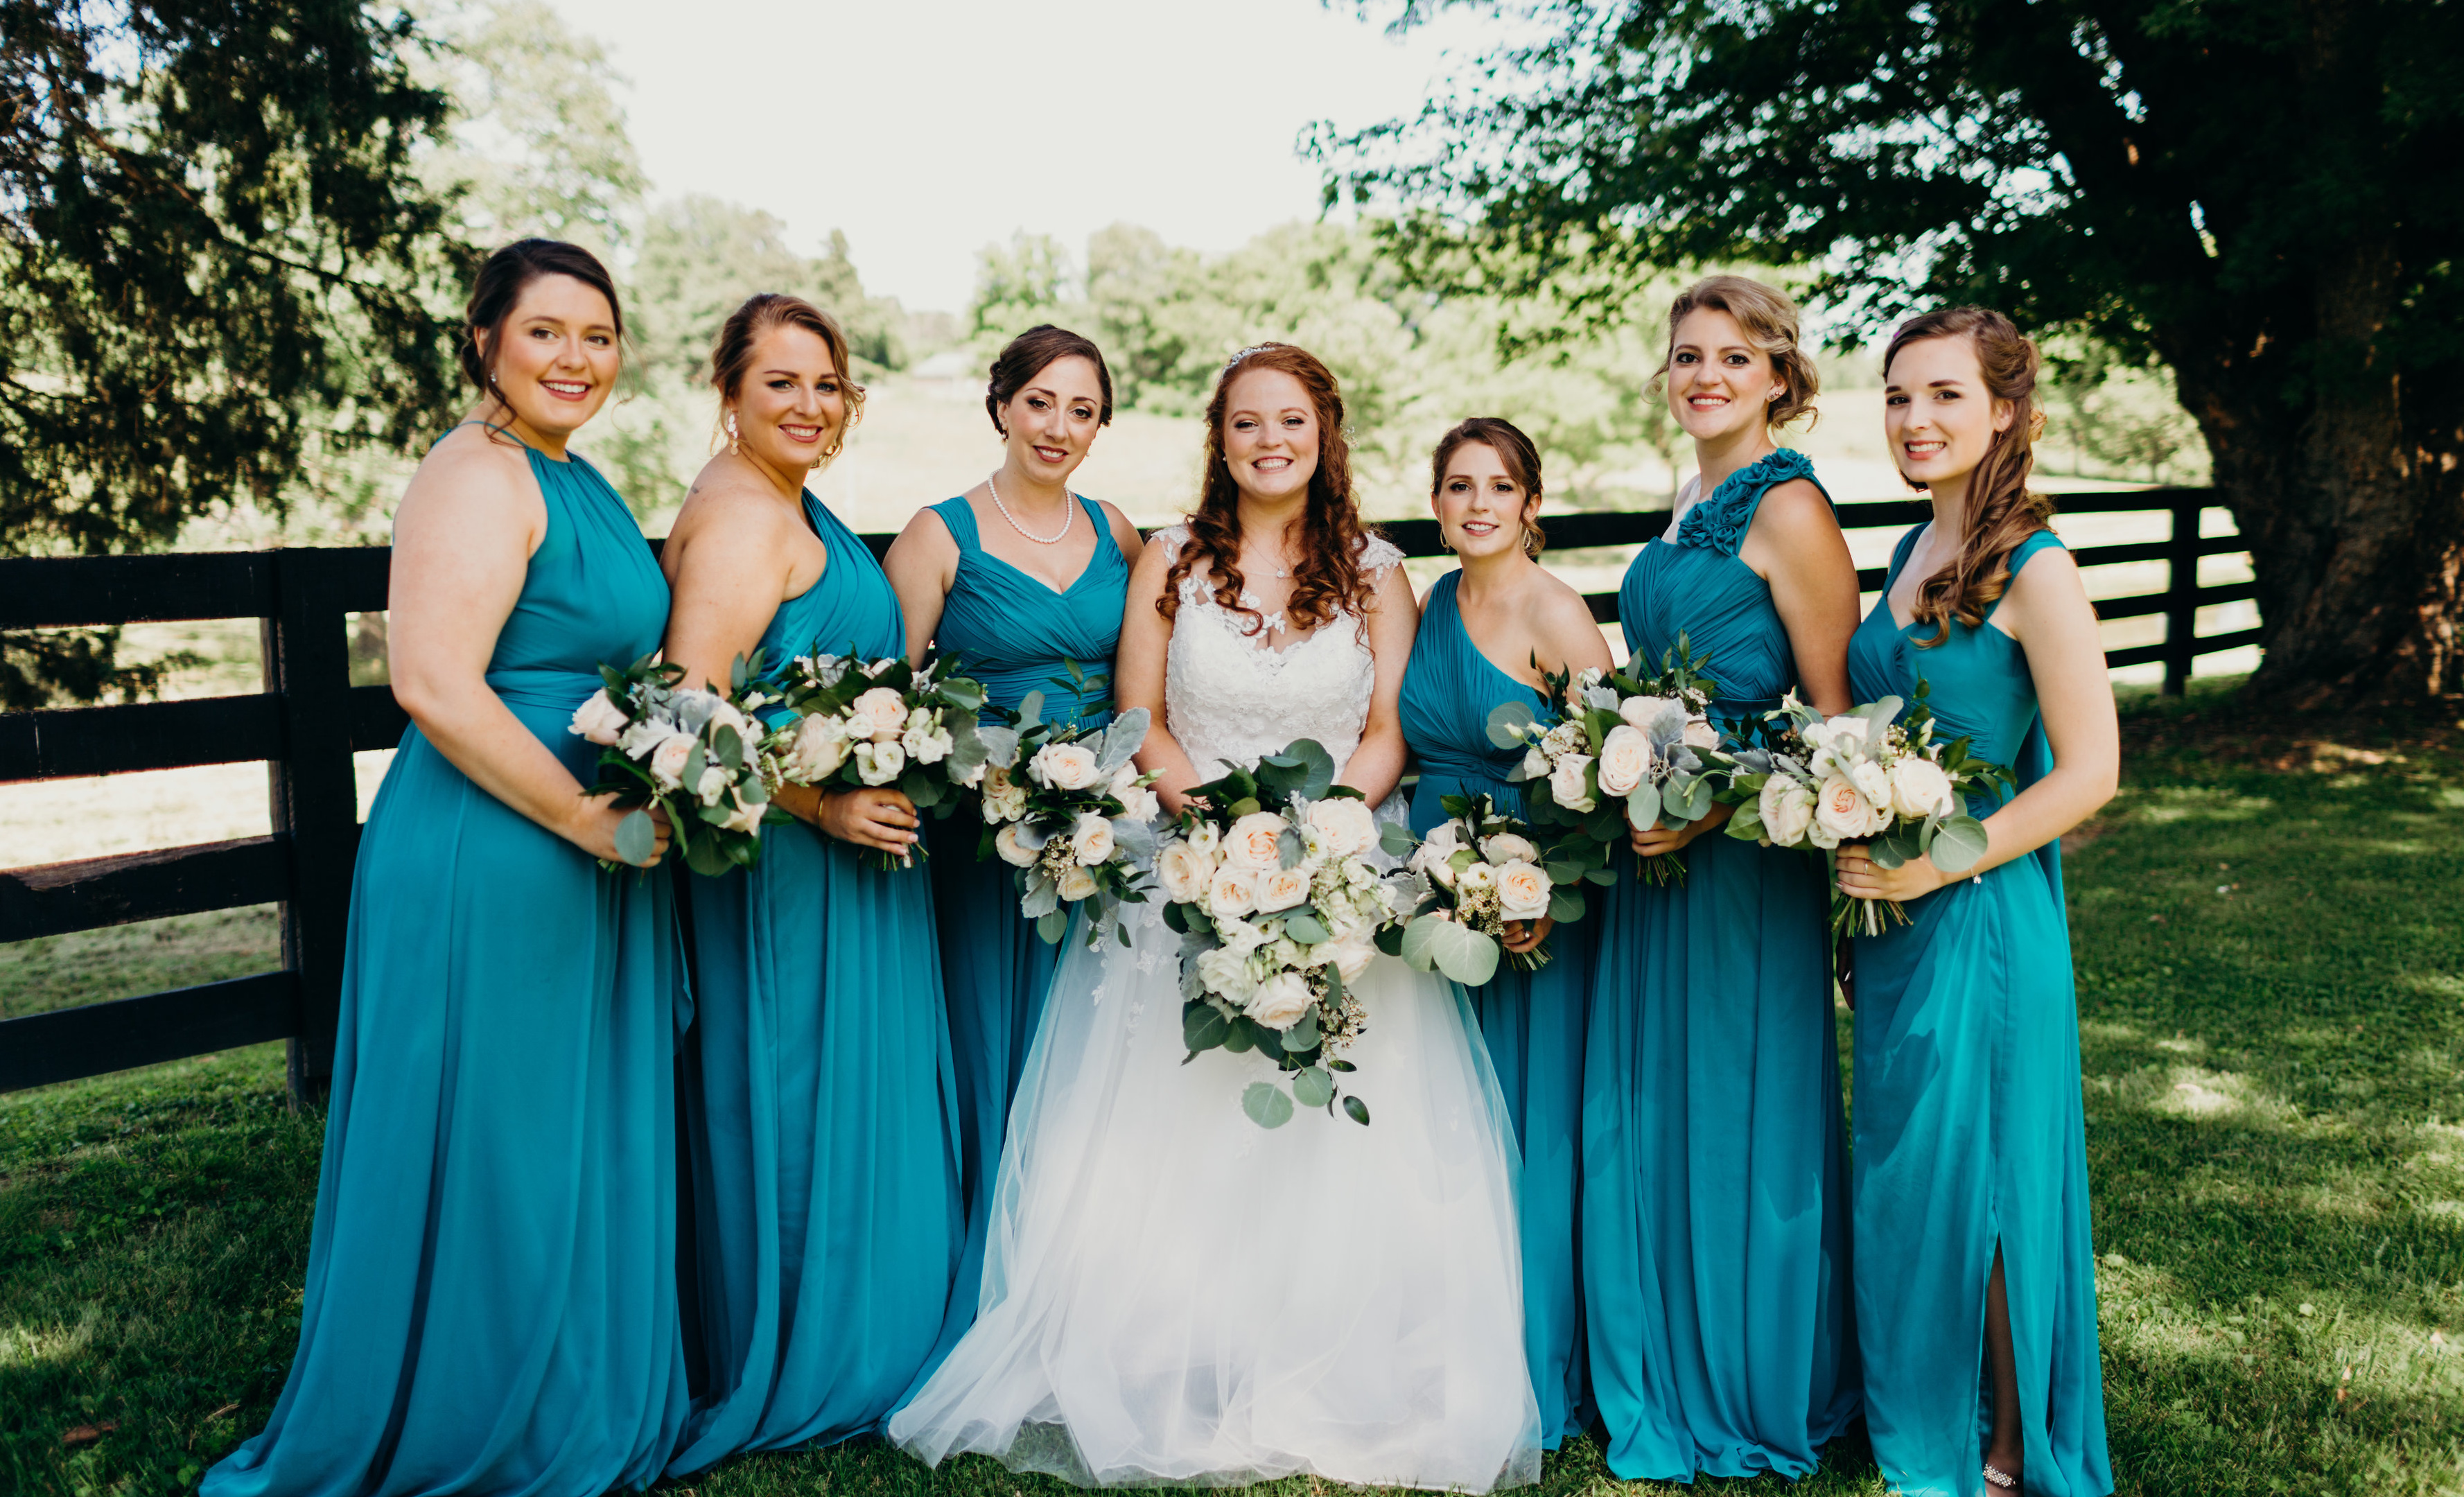 Romantic Traditional Wedding at Warrenwood Manor, Photo by Lydia Ruth Photography